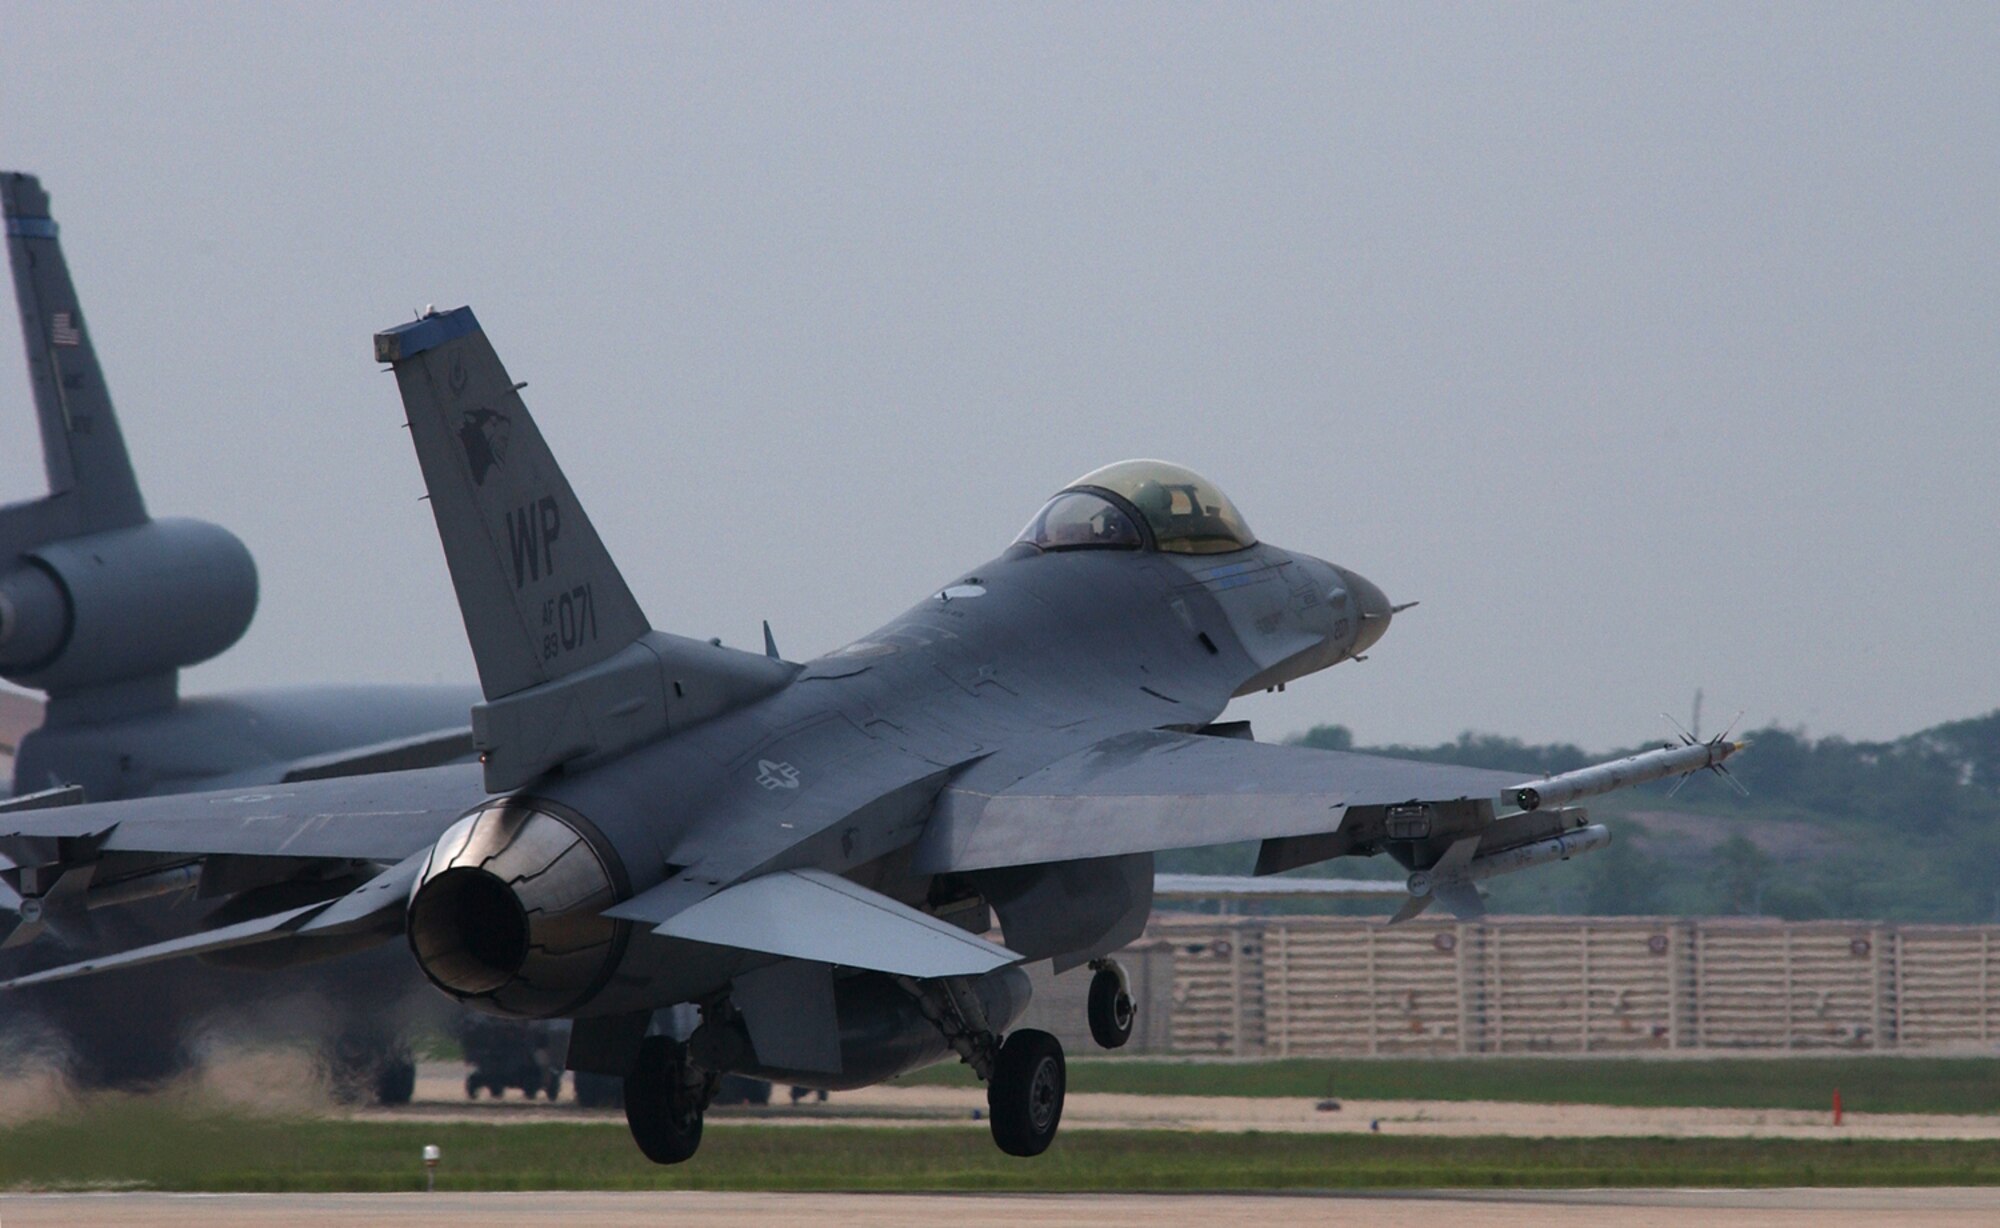 KUNSAN AIR BASE, Republic of Korea - An F-16 assigned to the 35th Fighter Squadron lifts off from Kunsan May 26 on its way to Paya Lebar Air Base, Singapore. The ?Panton? jet fighter was joined by approximately five additional aircraft, as well as roughly 80 pilots and maintenance personnel, in its deployment to the island nation in support of Operation Commando Sling. The joint operation between the air forces is in its 16th year. (Air Force photo by Senior Airman Joshua DeMotts)                               